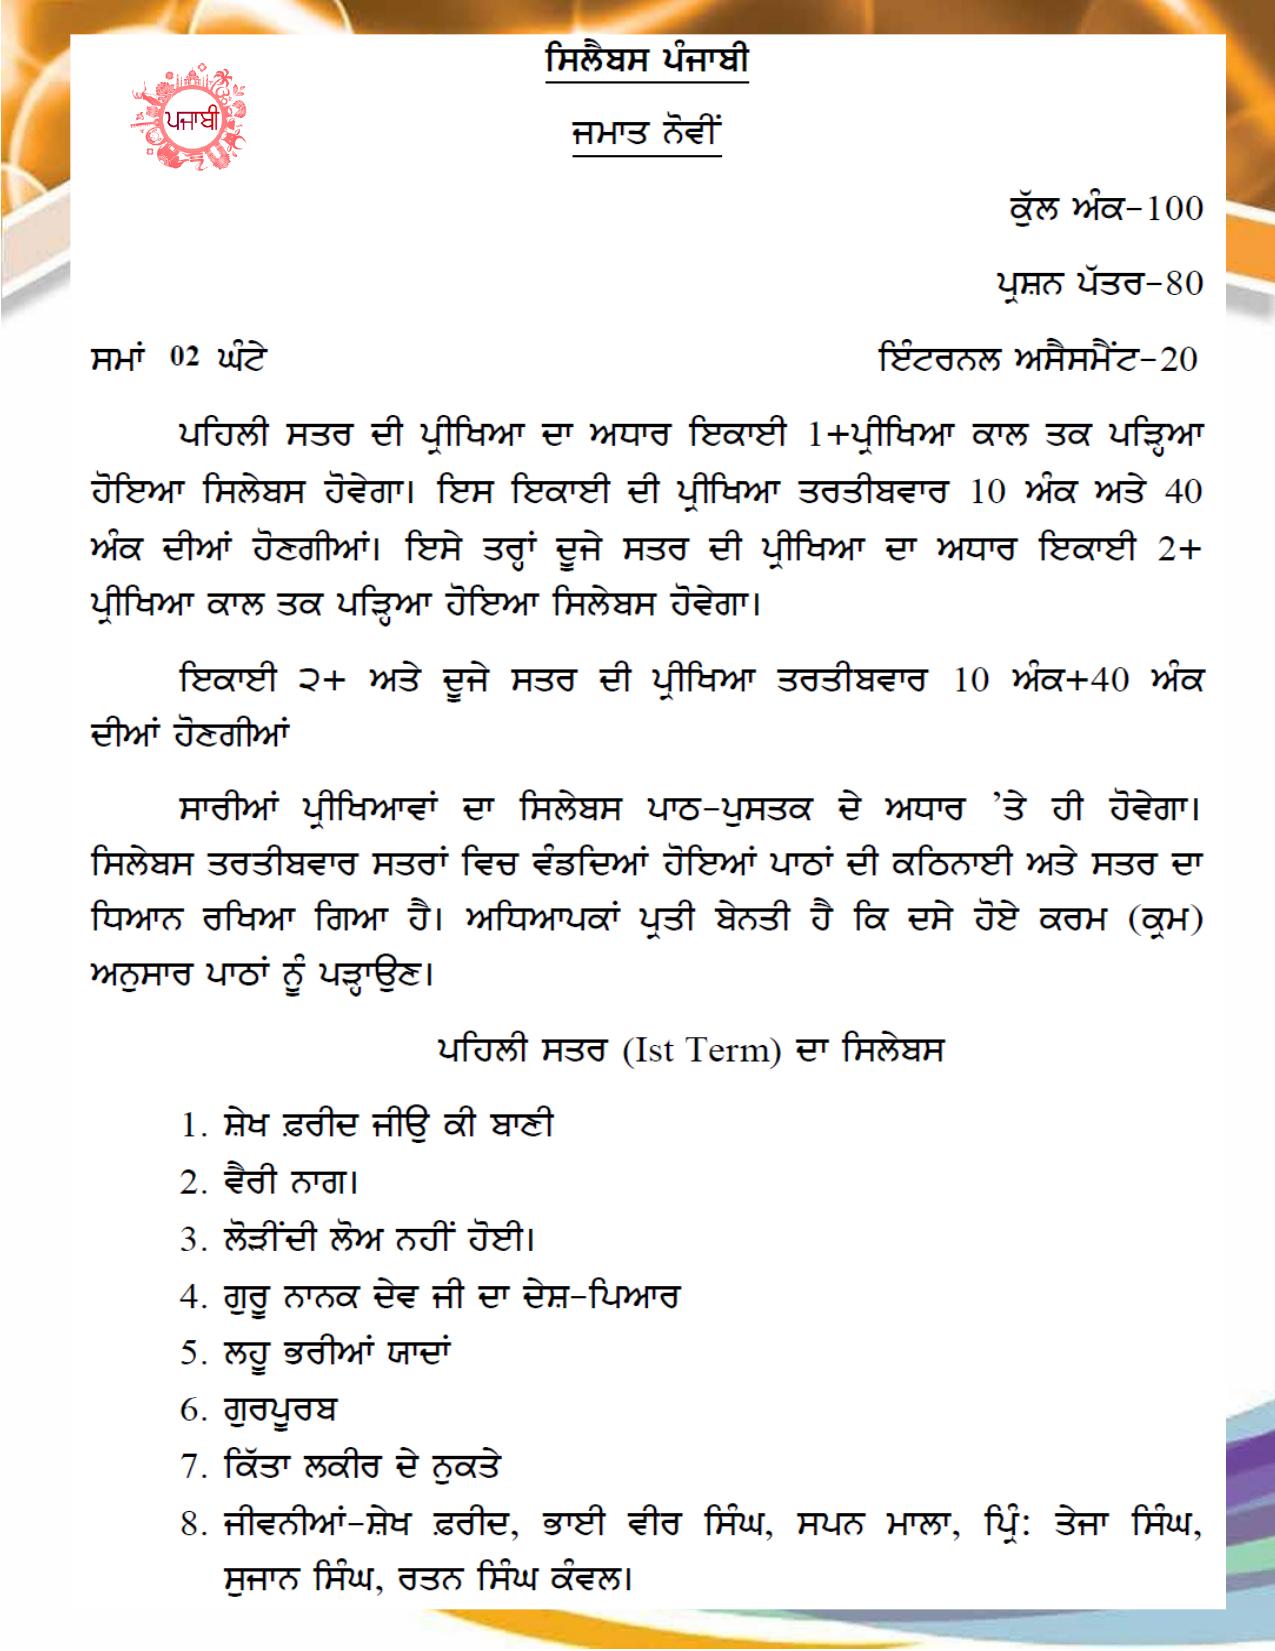 JKBOSE Syllabus for 9th class - Page 60